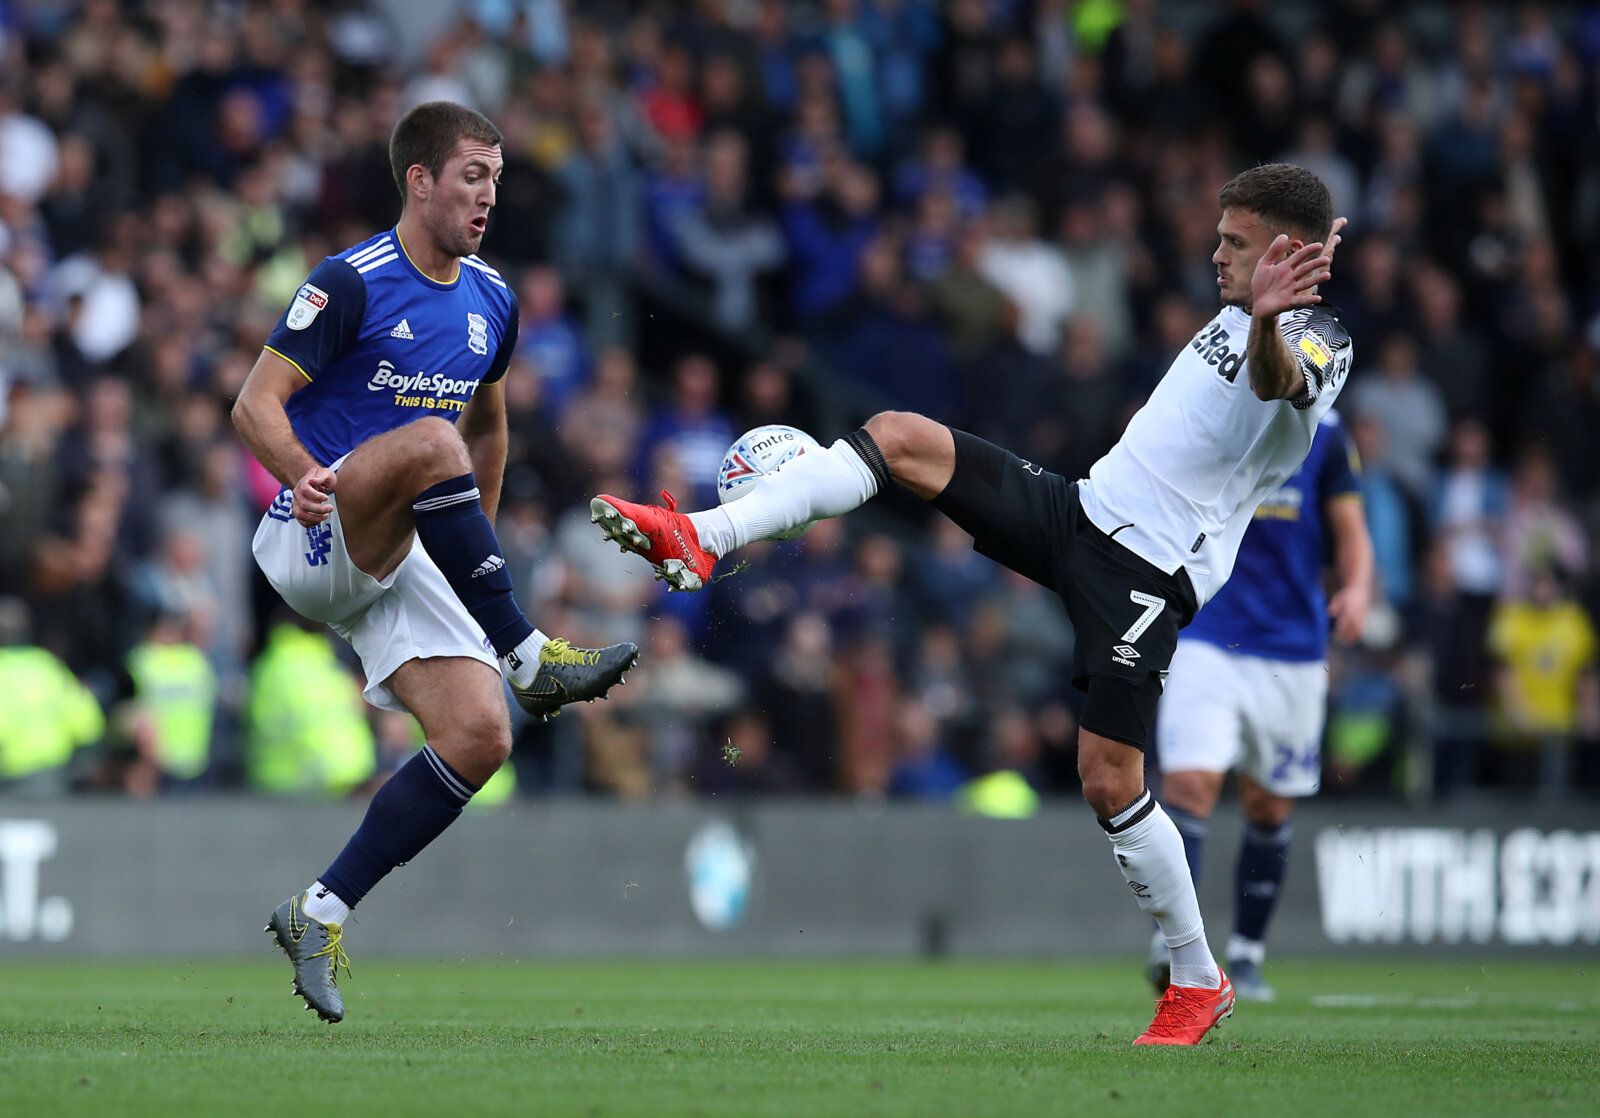 Soccer Football - Championship - Derby County v Birmingham City - Pride Park, Derby, Britain - September 28, 2019   Birmingham City's Gary Gardner in action with Derby County's Jamie Paterson   Action Images/John Clifton    EDITORIAL USE ONLY. No use with unauthorized audio, video, data, fixture lists, club/league logos or 